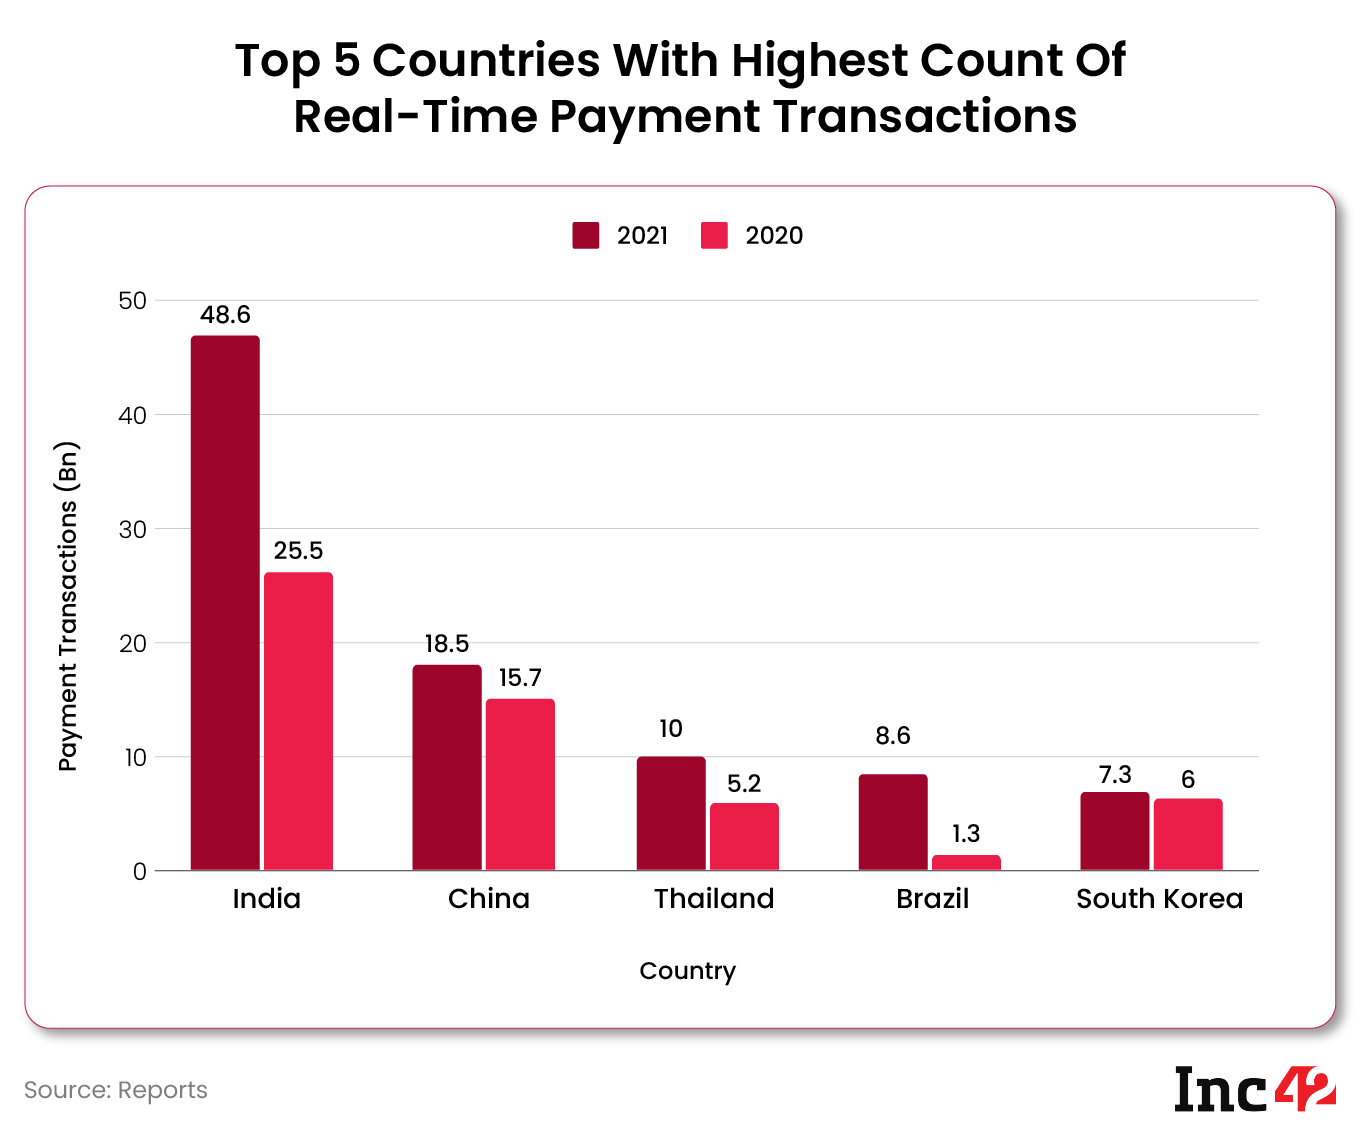 Top 5 countries with highest count of real-time payment transactions